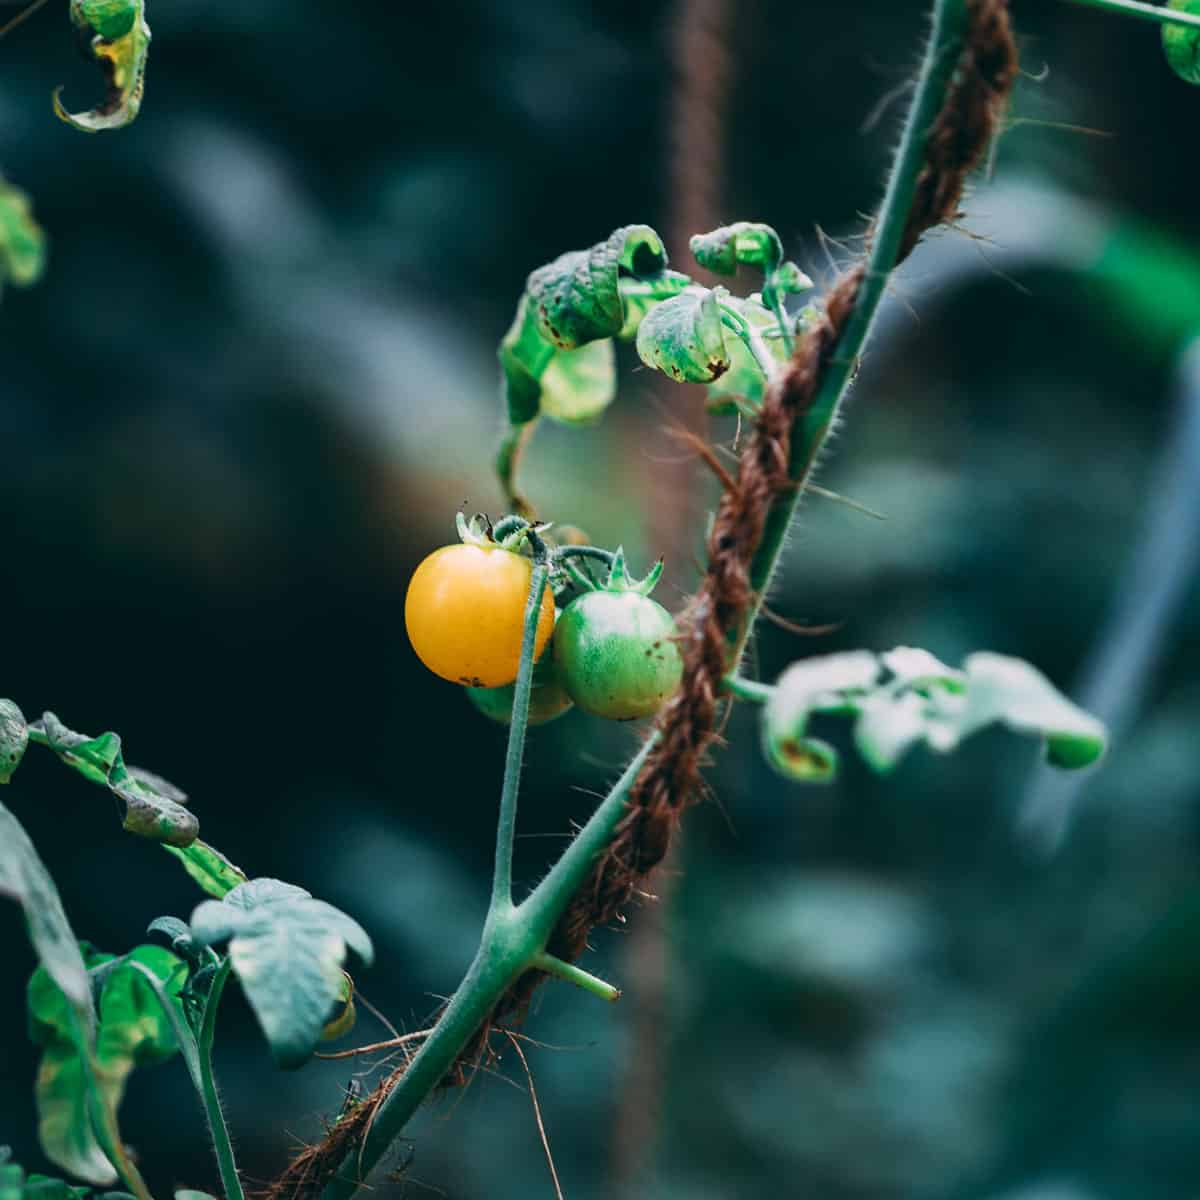 Tomatoes growing in our backyard in auroville